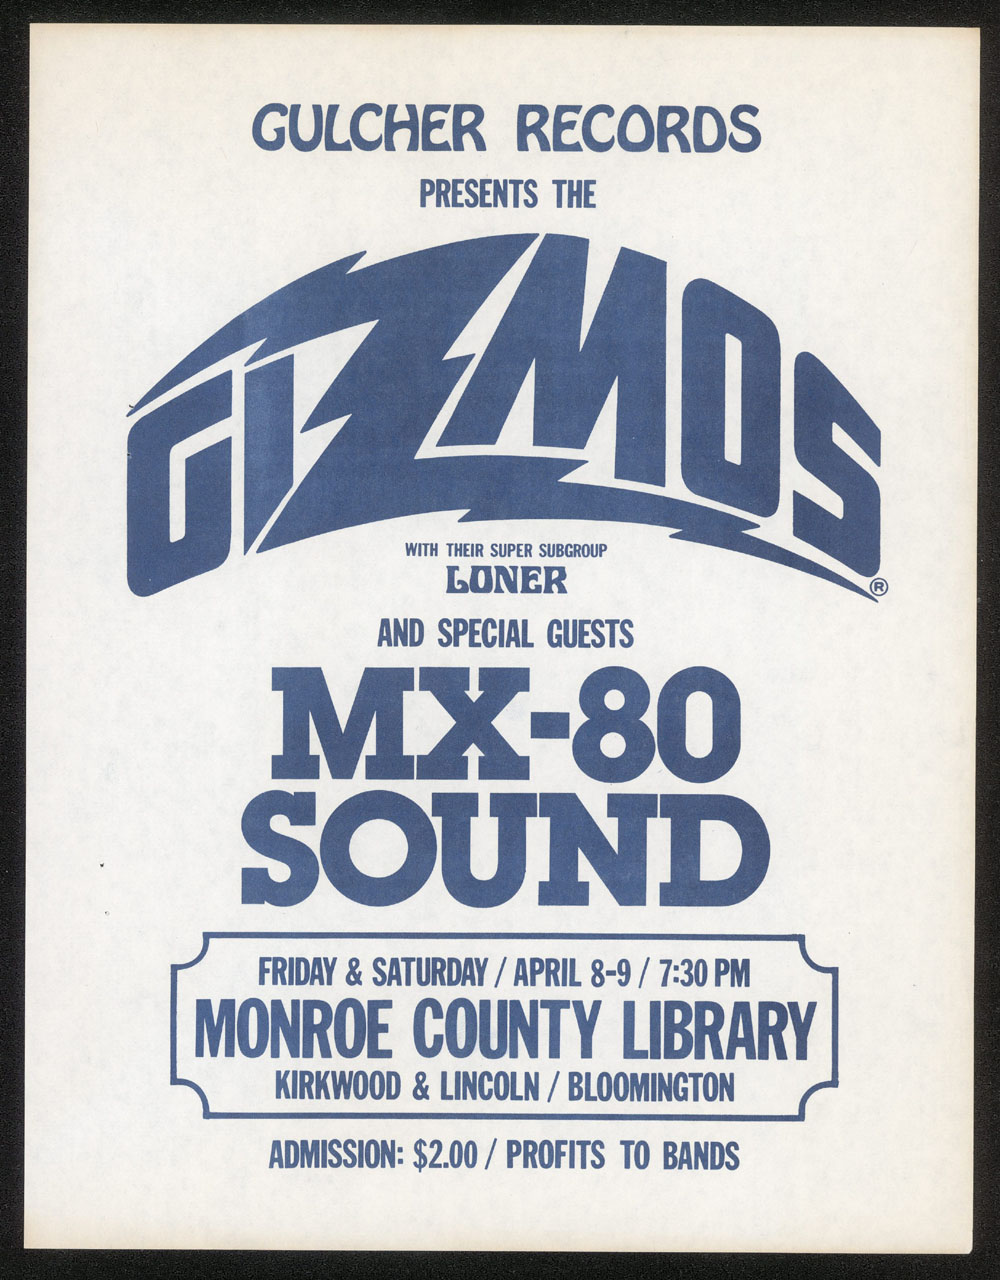 GIZMOS w/ Loner, MX-80 Sound at Monroe County Library